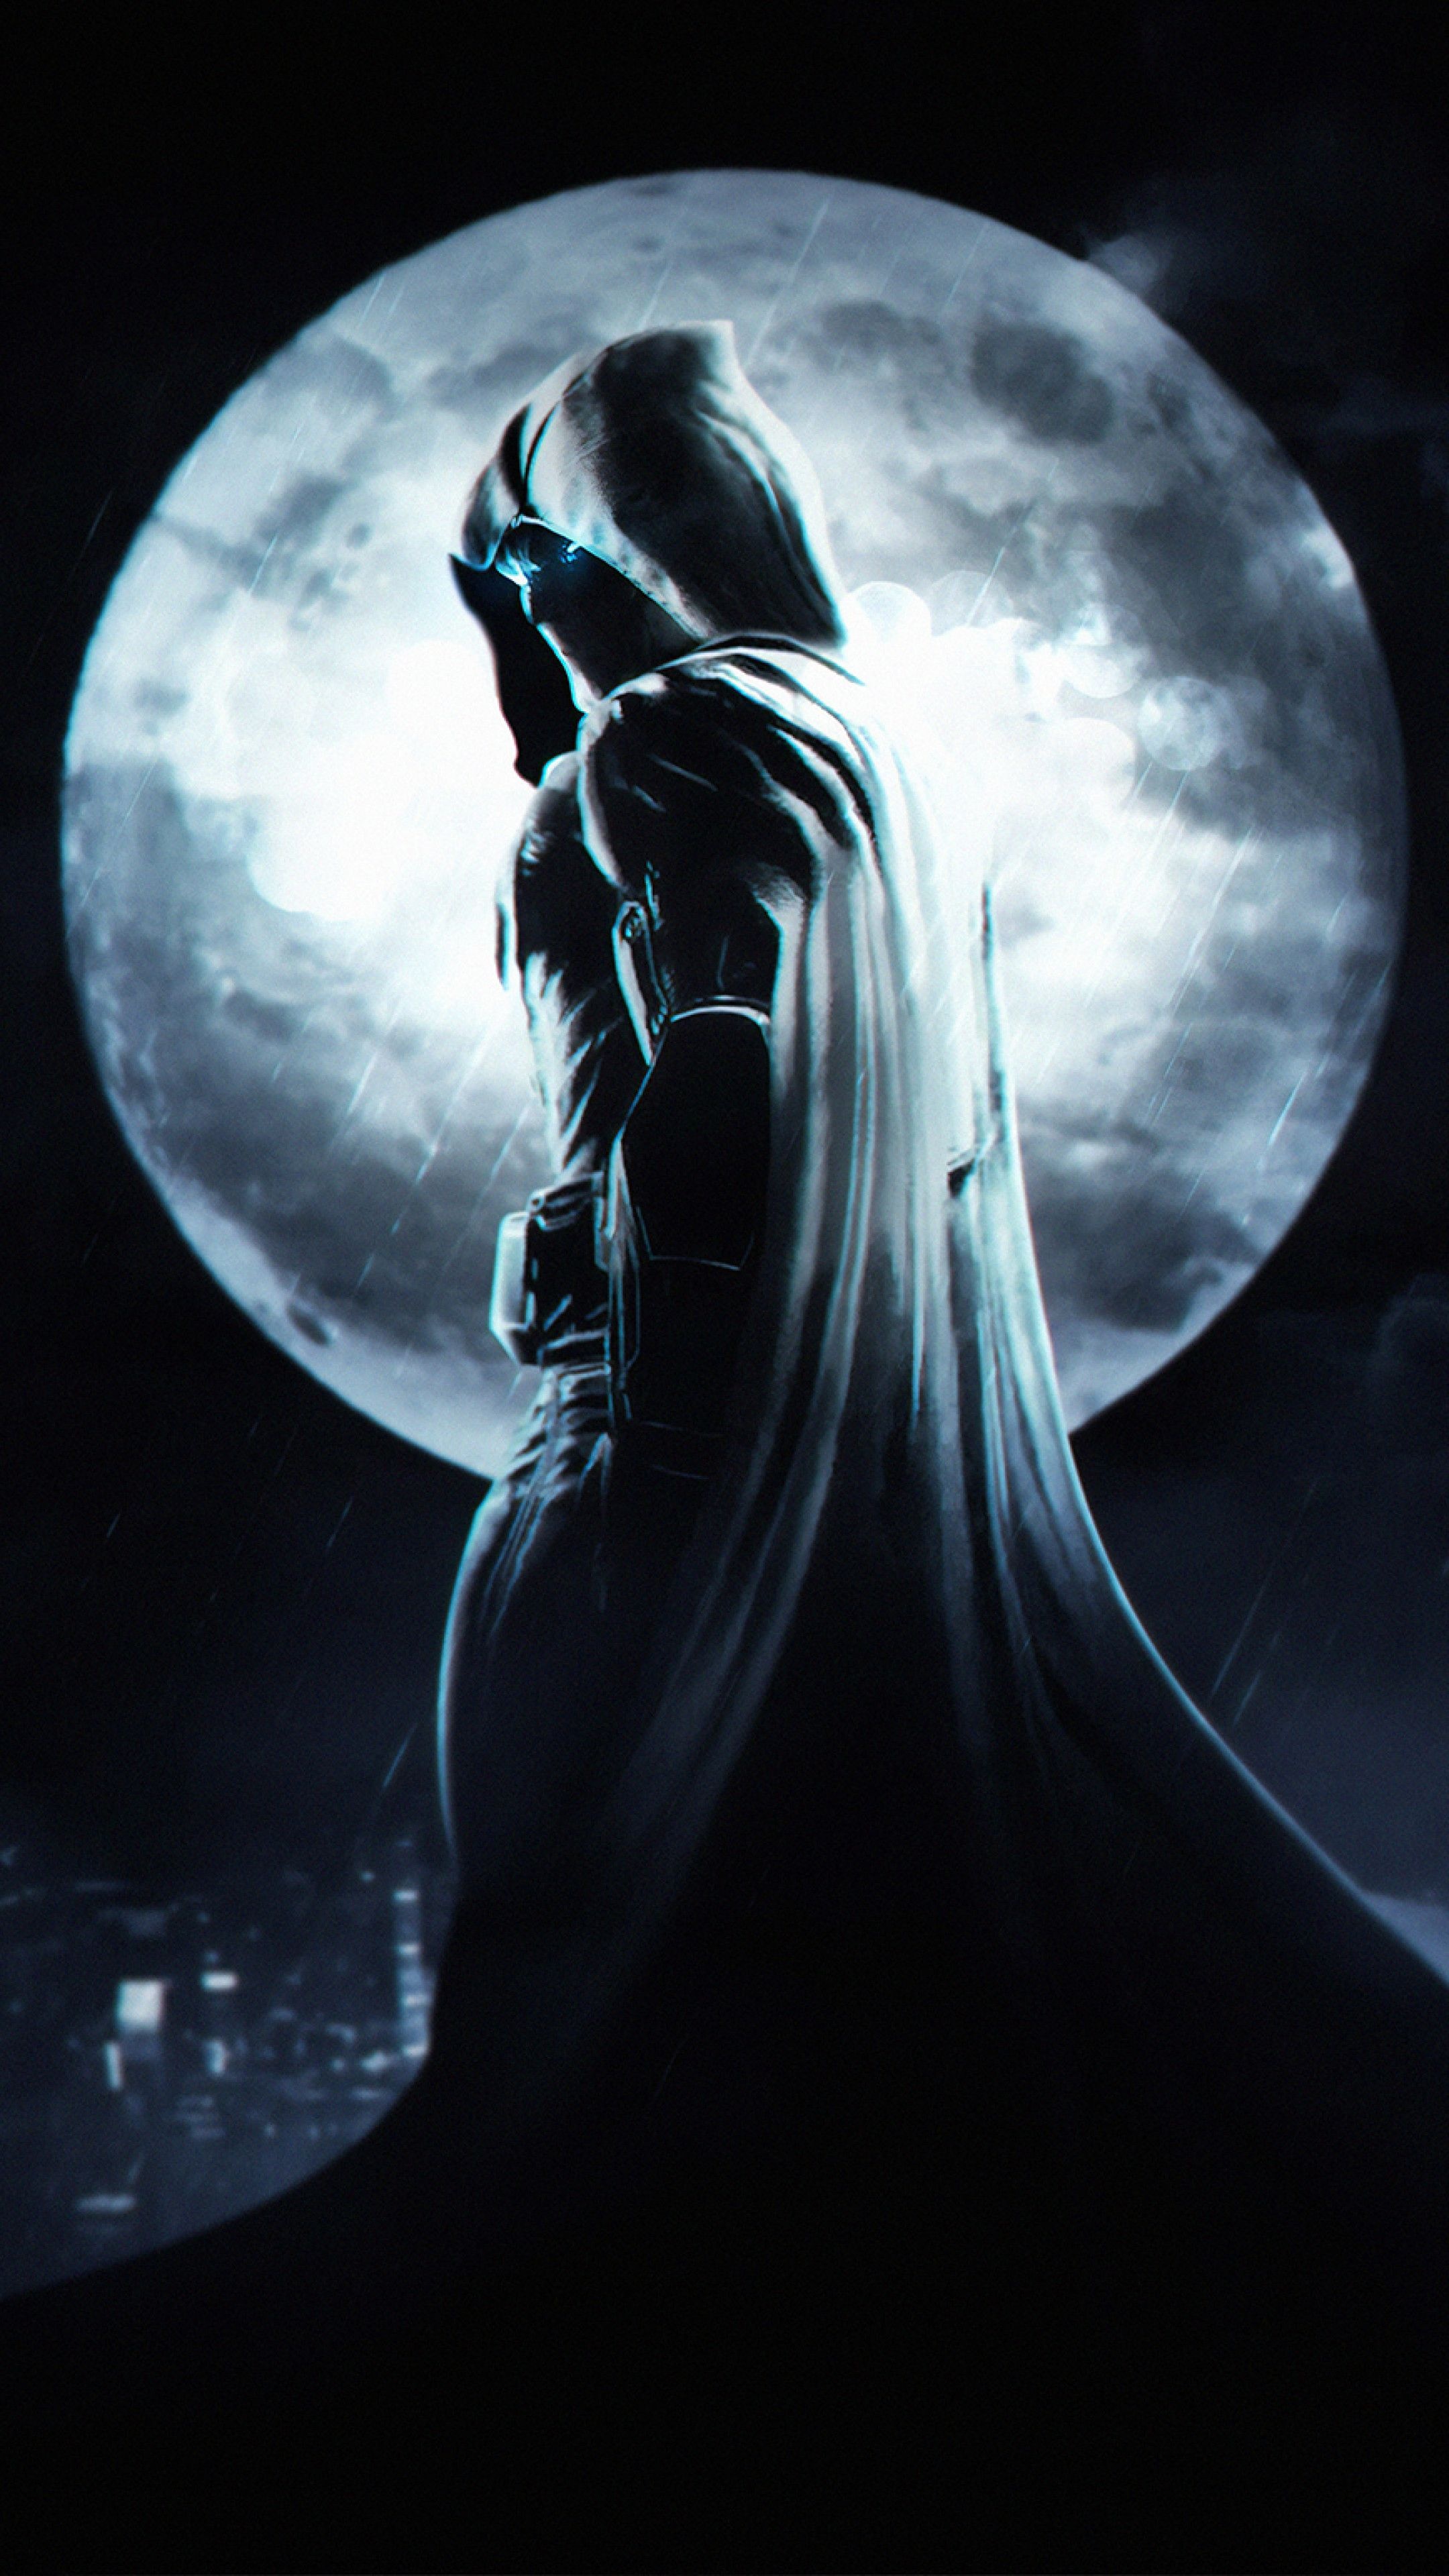 Moon Knight (TV Mini Series): The sixth television series in the Marvel Cinematic Universe. 2160x3840 4K Wallpaper.